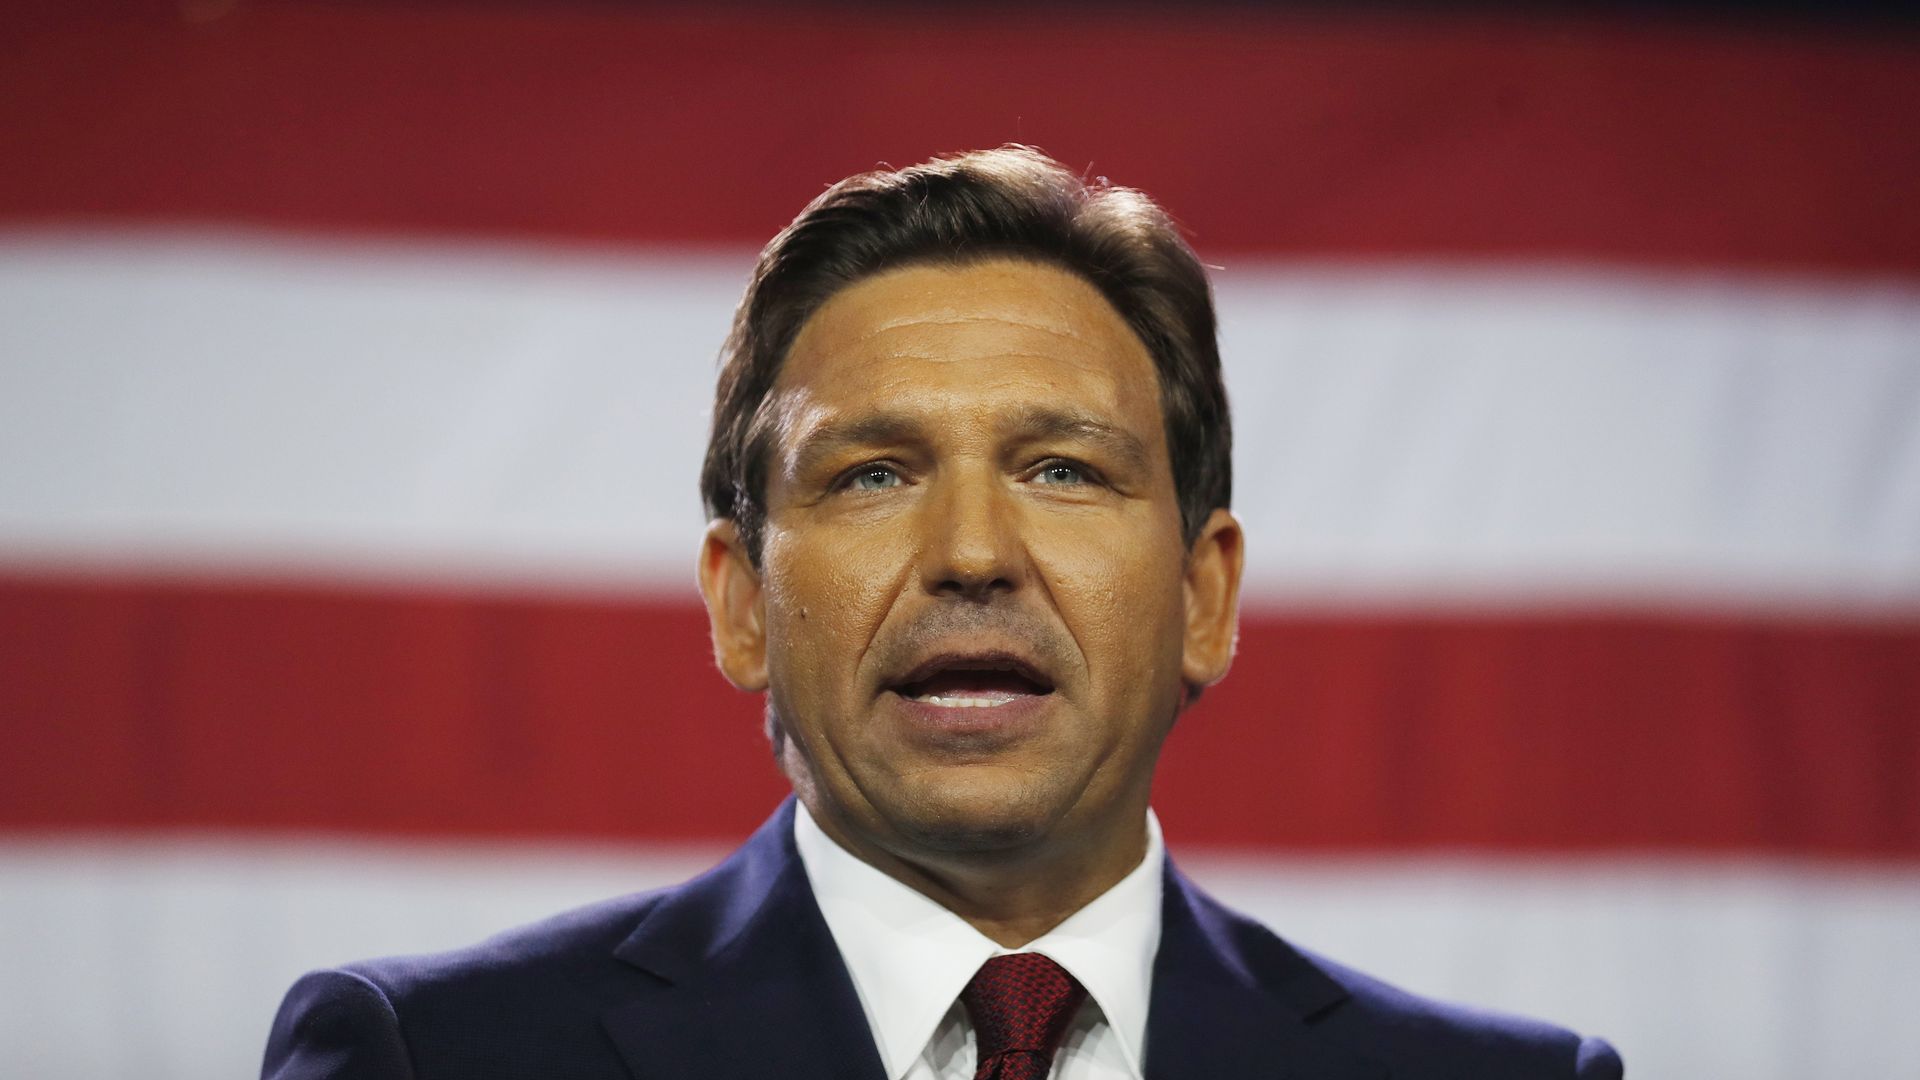 Florida Gov. Ron DeSantis in front of an American flag.